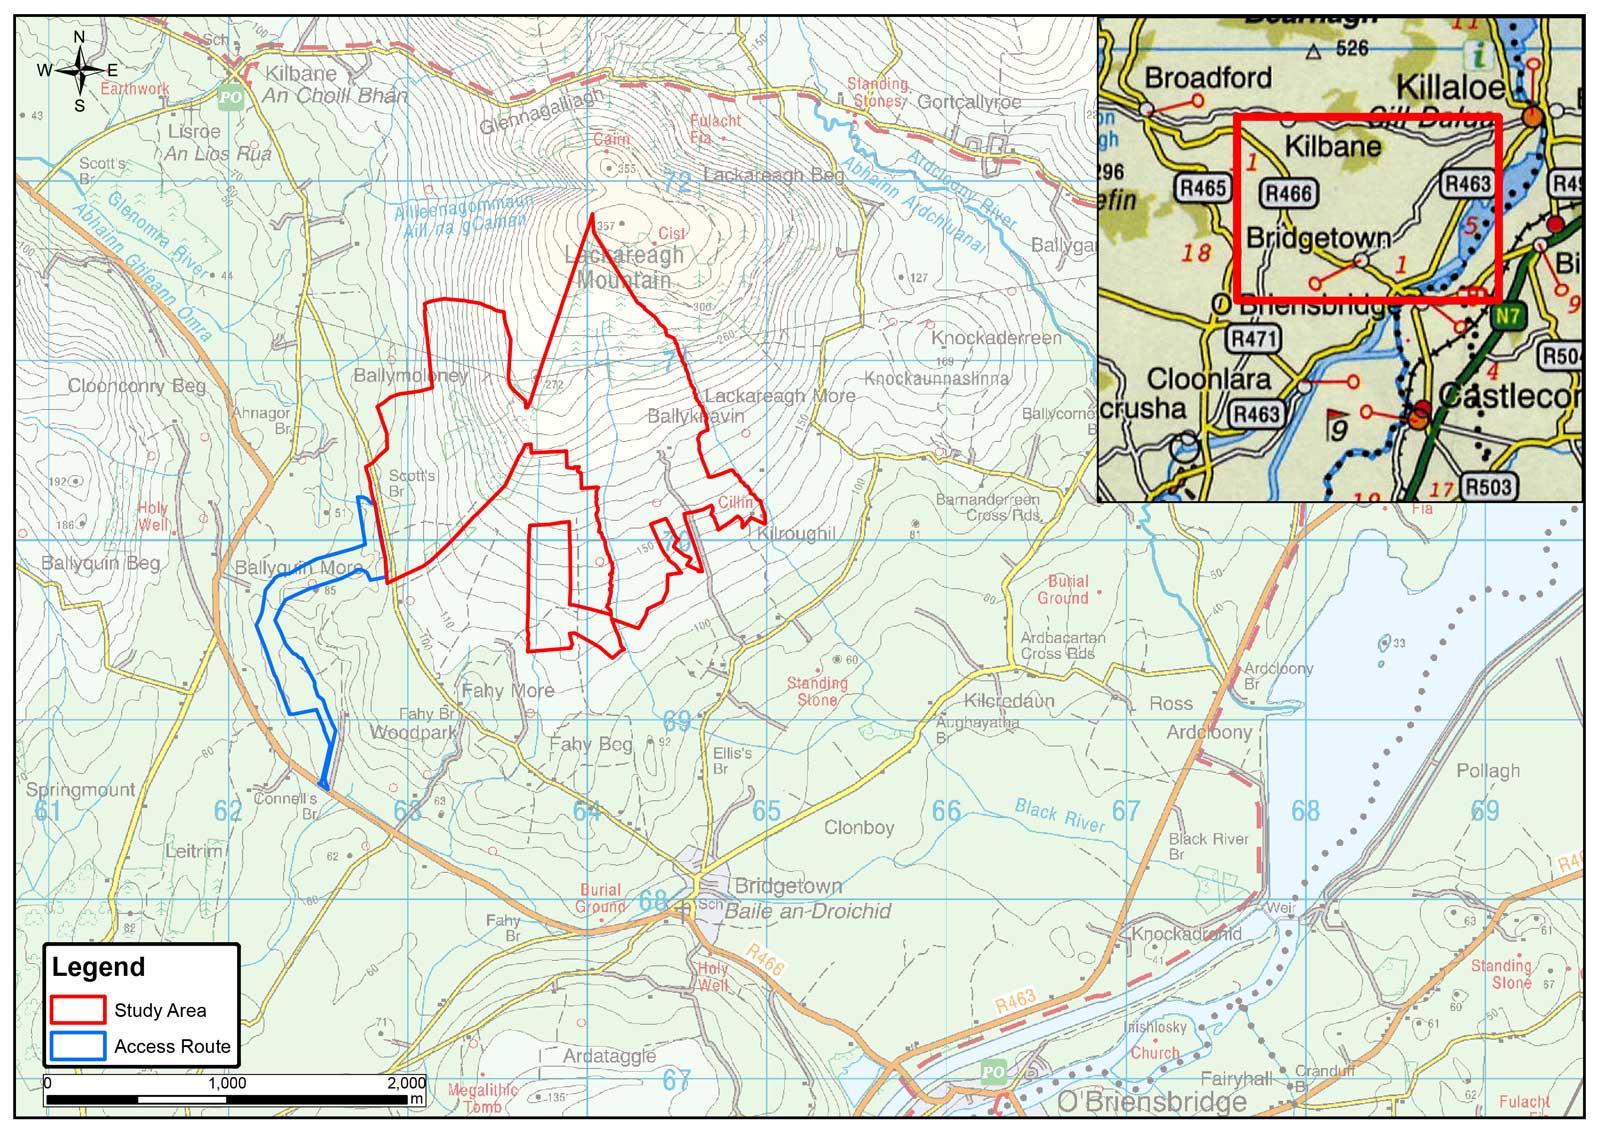 Fahy Beg Onshore Wind Farm | Map of study area